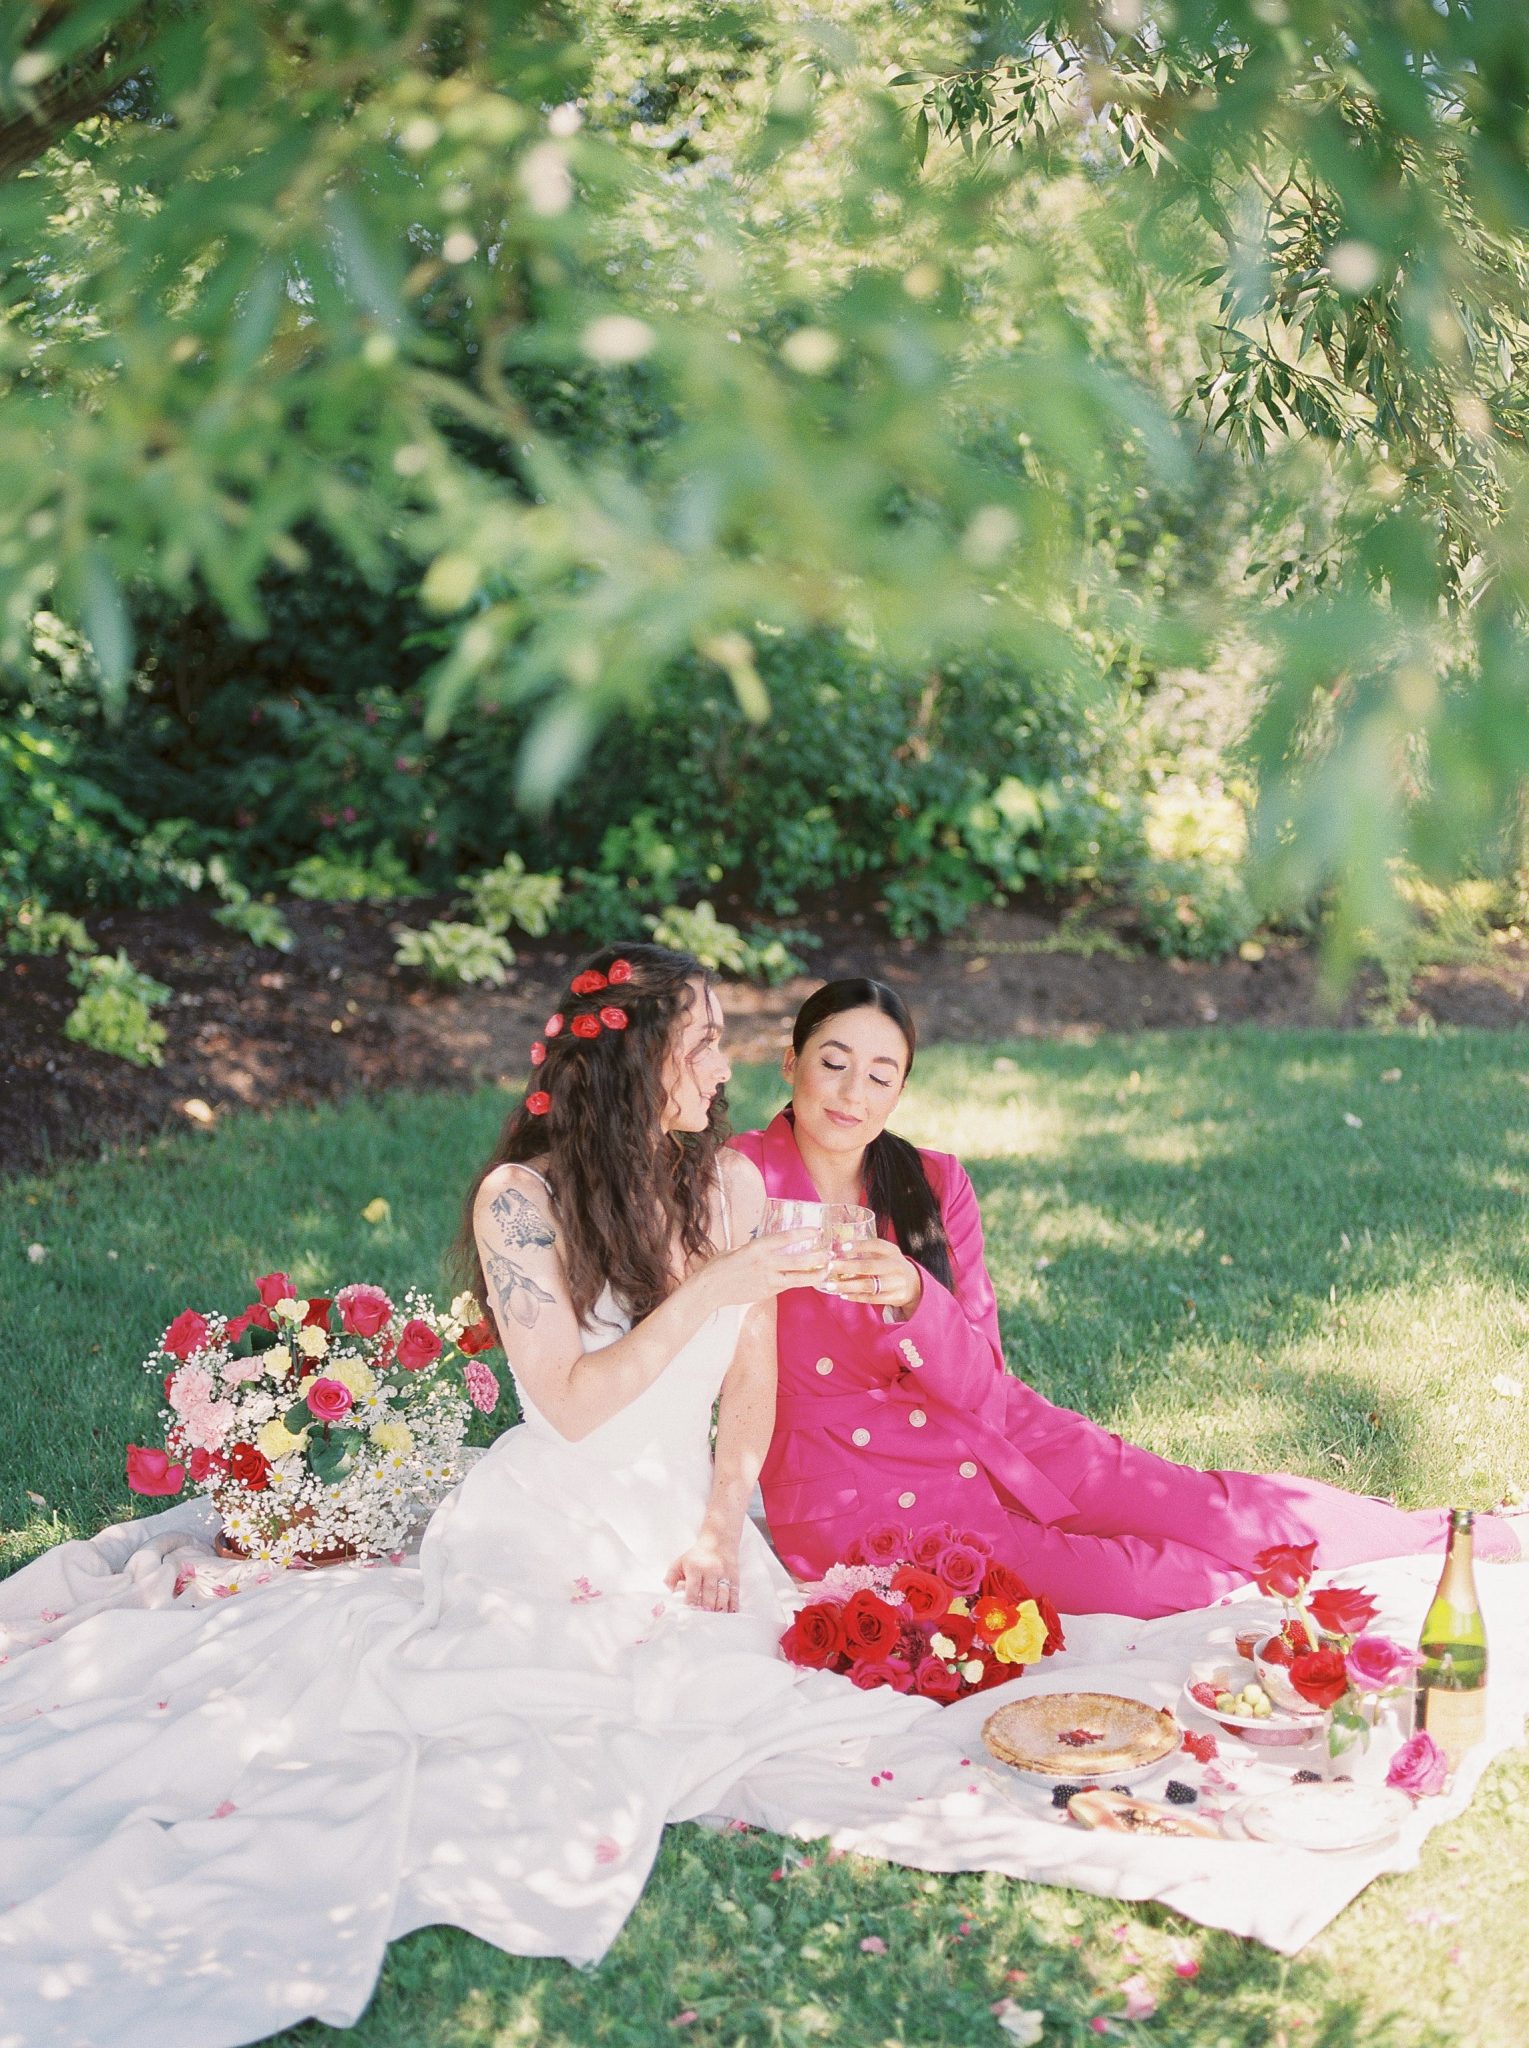 Hot Pink Perfection for this Picnic in the Park Valentine's Day Inspiration Featured by Brontë Bride, picnic inspiration, valentines day